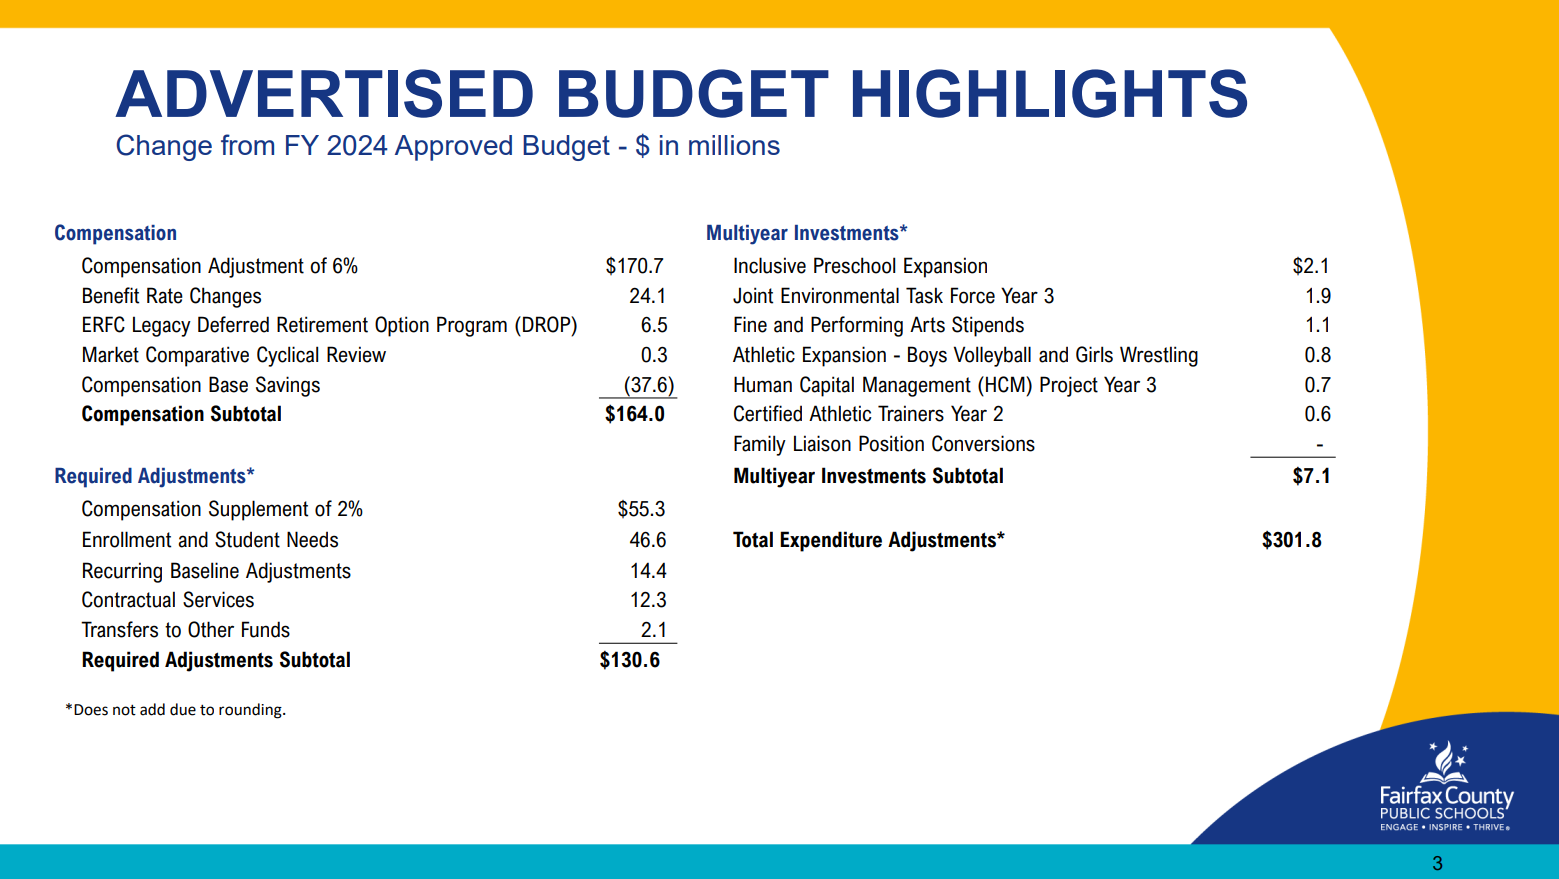 Highlights of FCPS' FY25 advertised budget